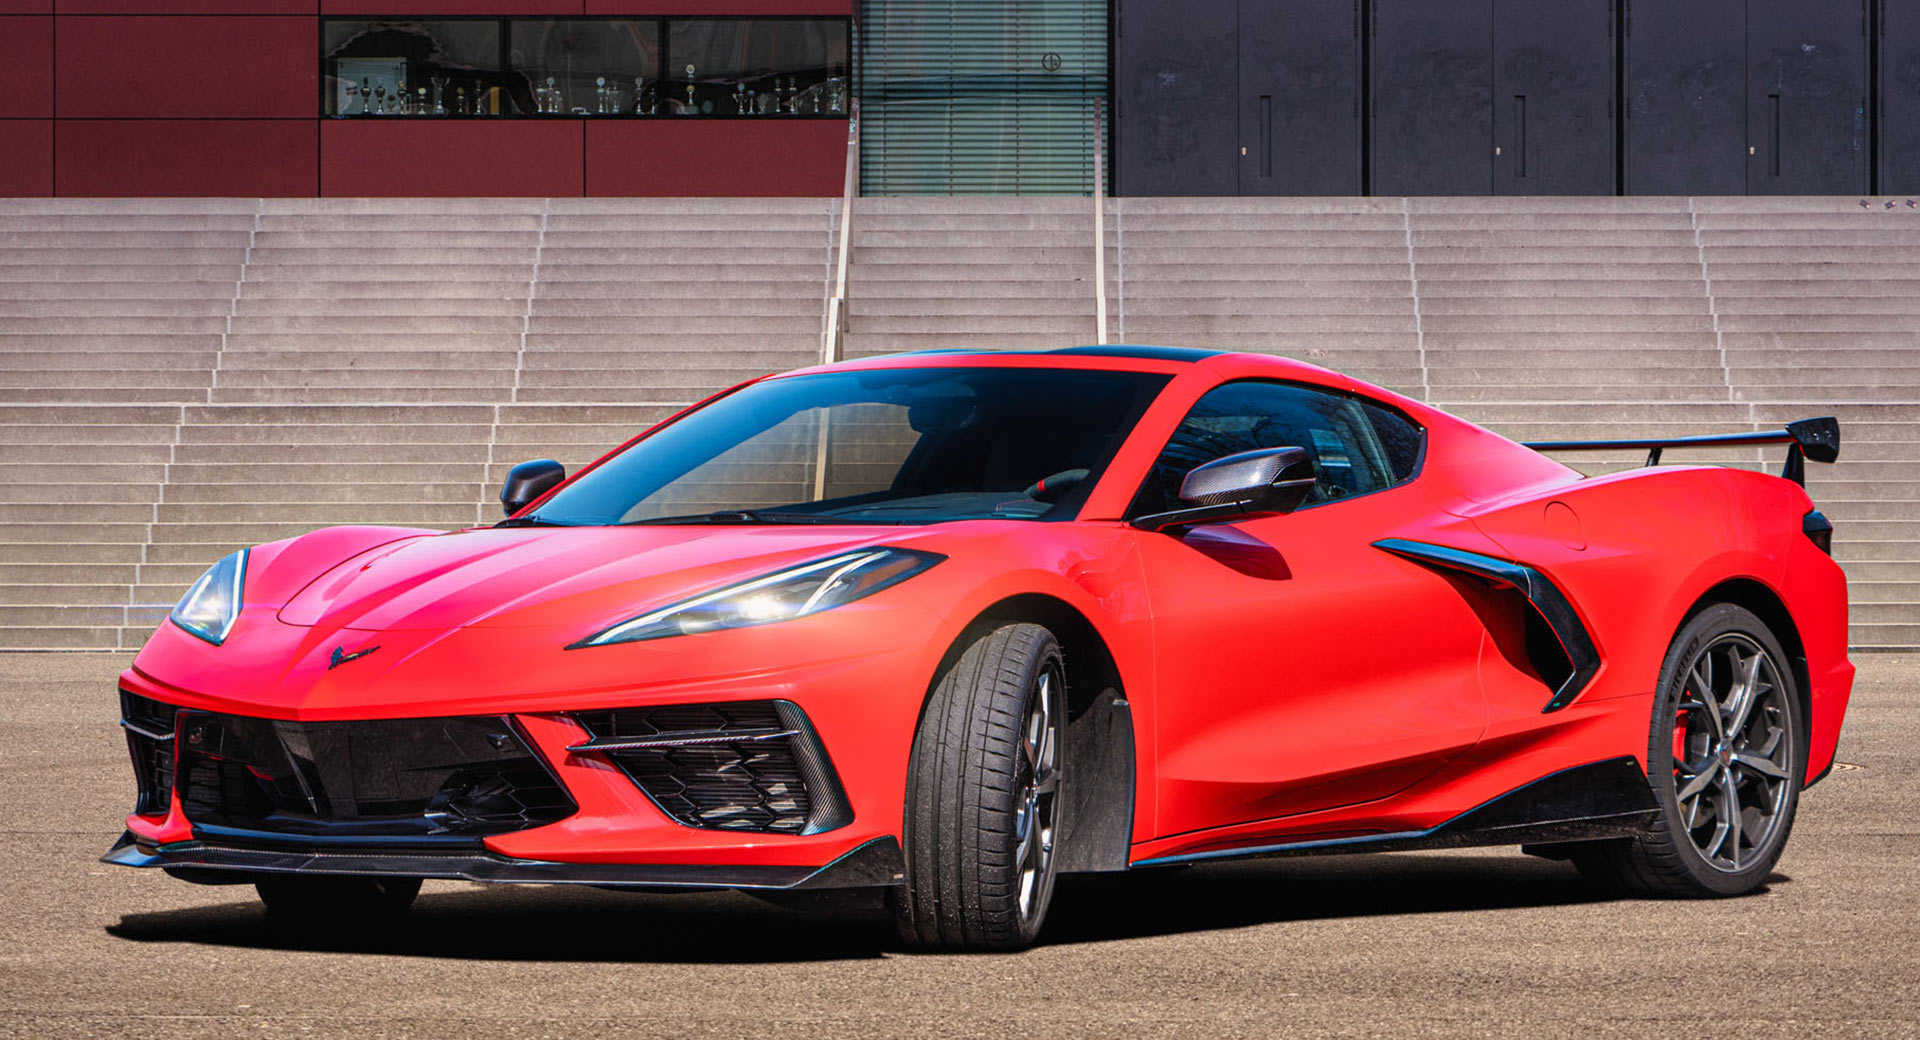 German Tuner Gives The C8 Corvette Aero Parts And A New Exhaust Carscoops.